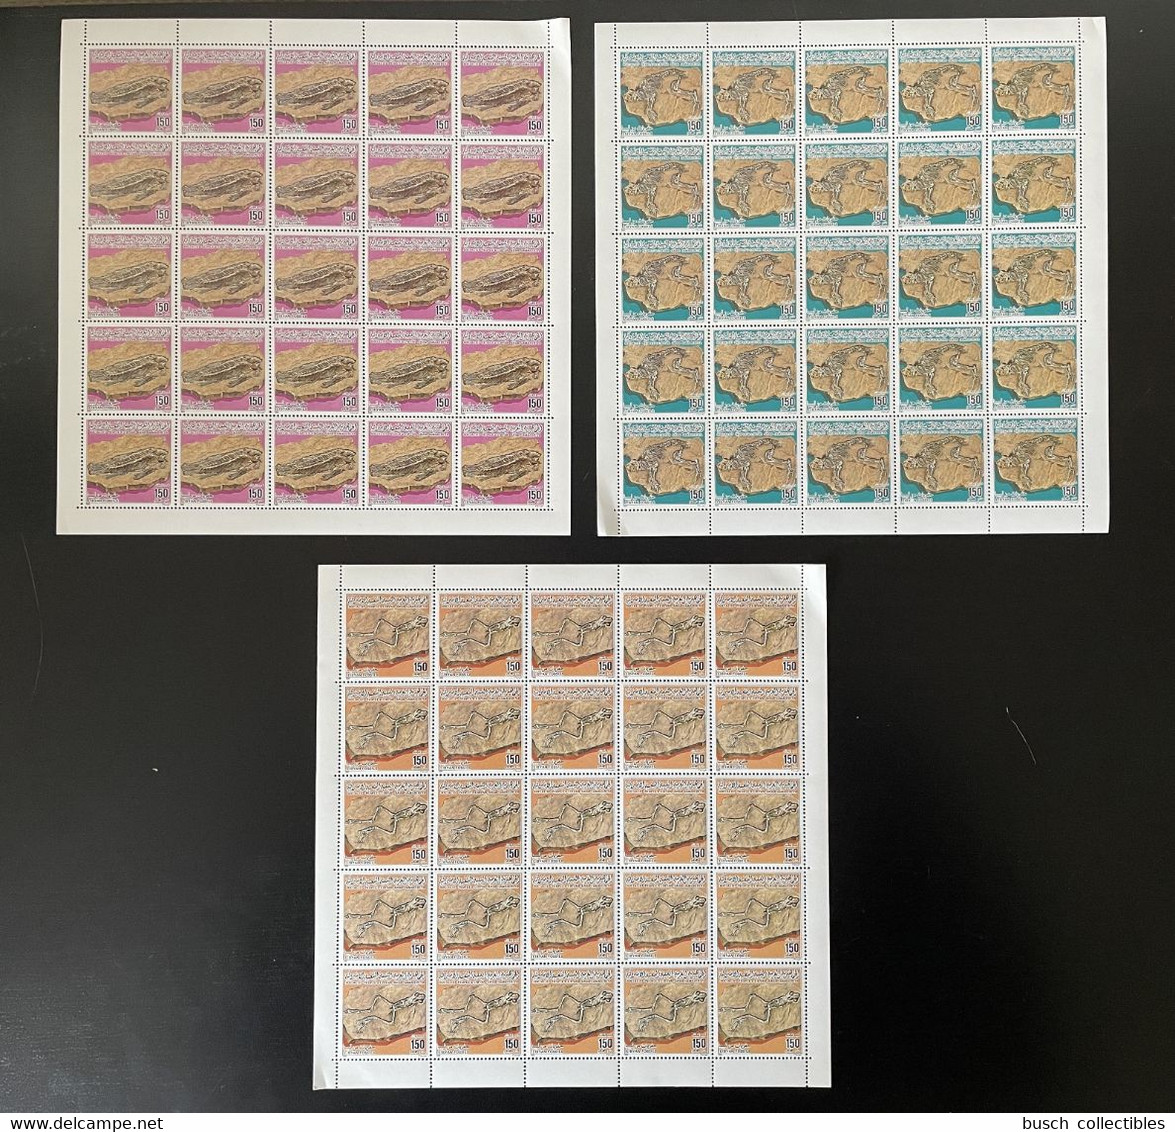 Libye Libya 1985 Mi. 1478 - 1480 Libyan Fossils Fossilien Fossiles Full Sheets Of 25 Stamps RARE SCARCE - Archaeology